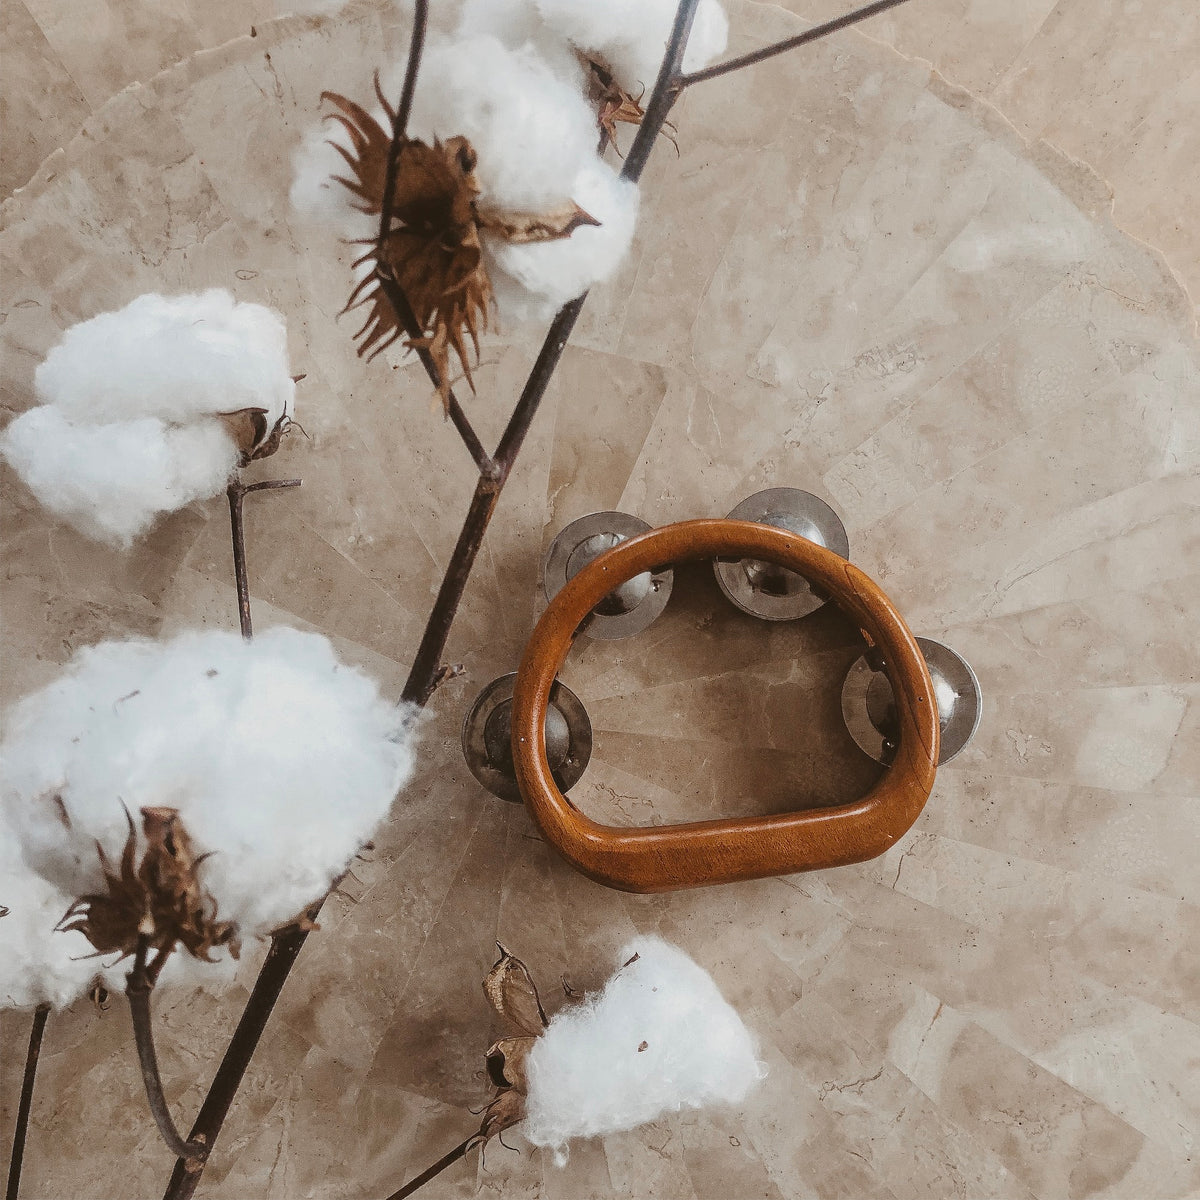 an image of a wooden tambourine instrument on a natural table with fluffy white cotton dried flowers next to it 